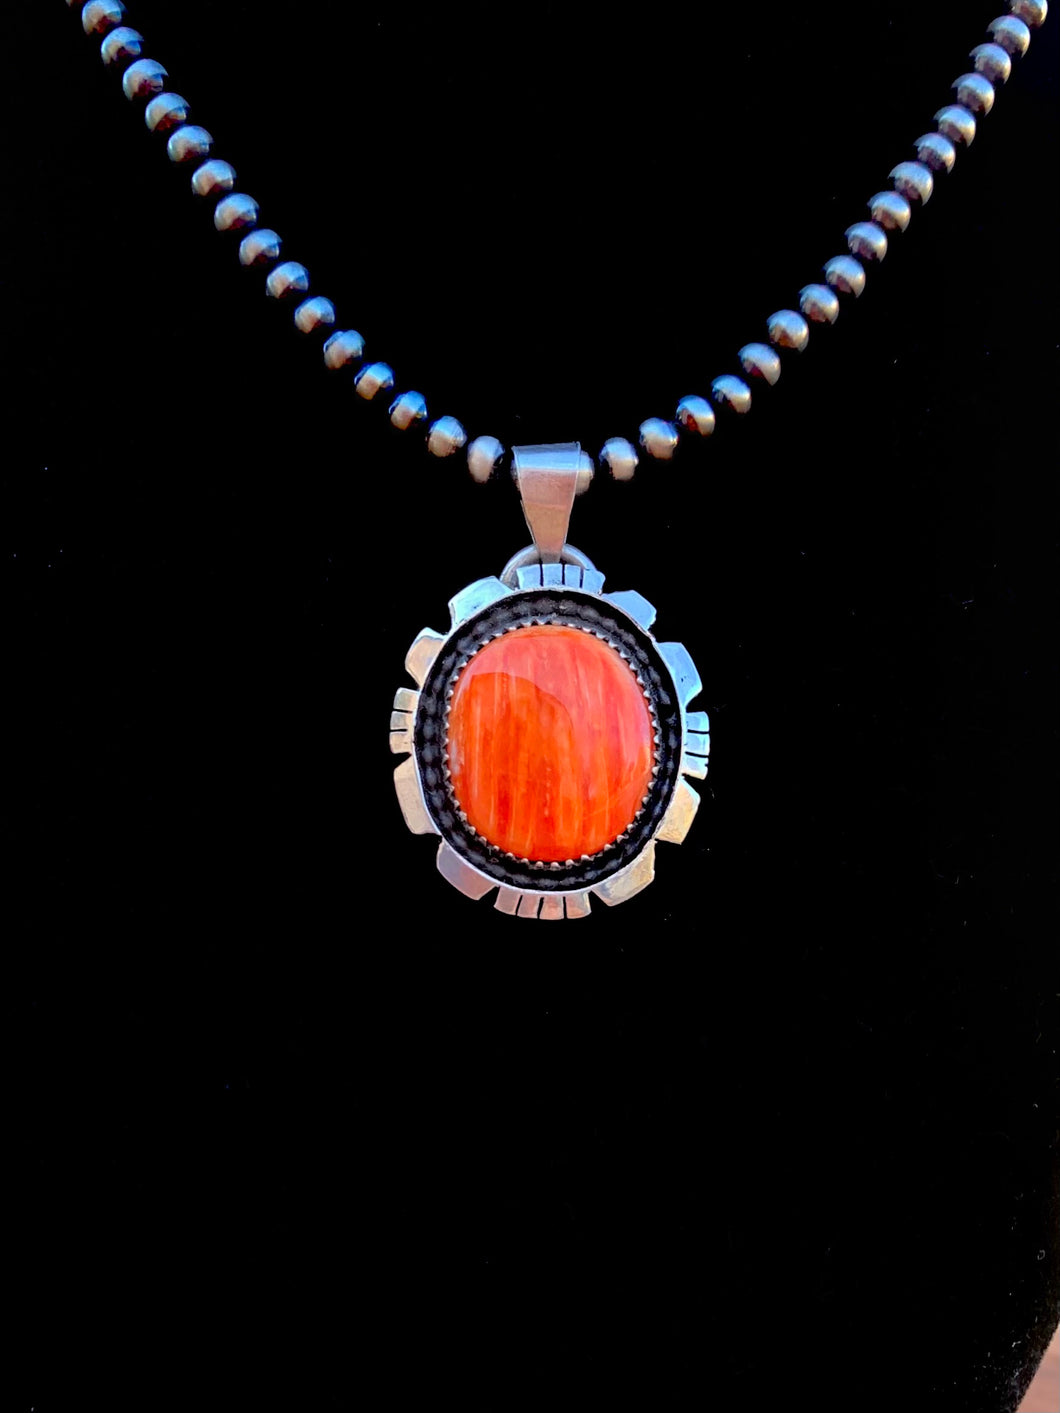 The Sweetwater Pendant